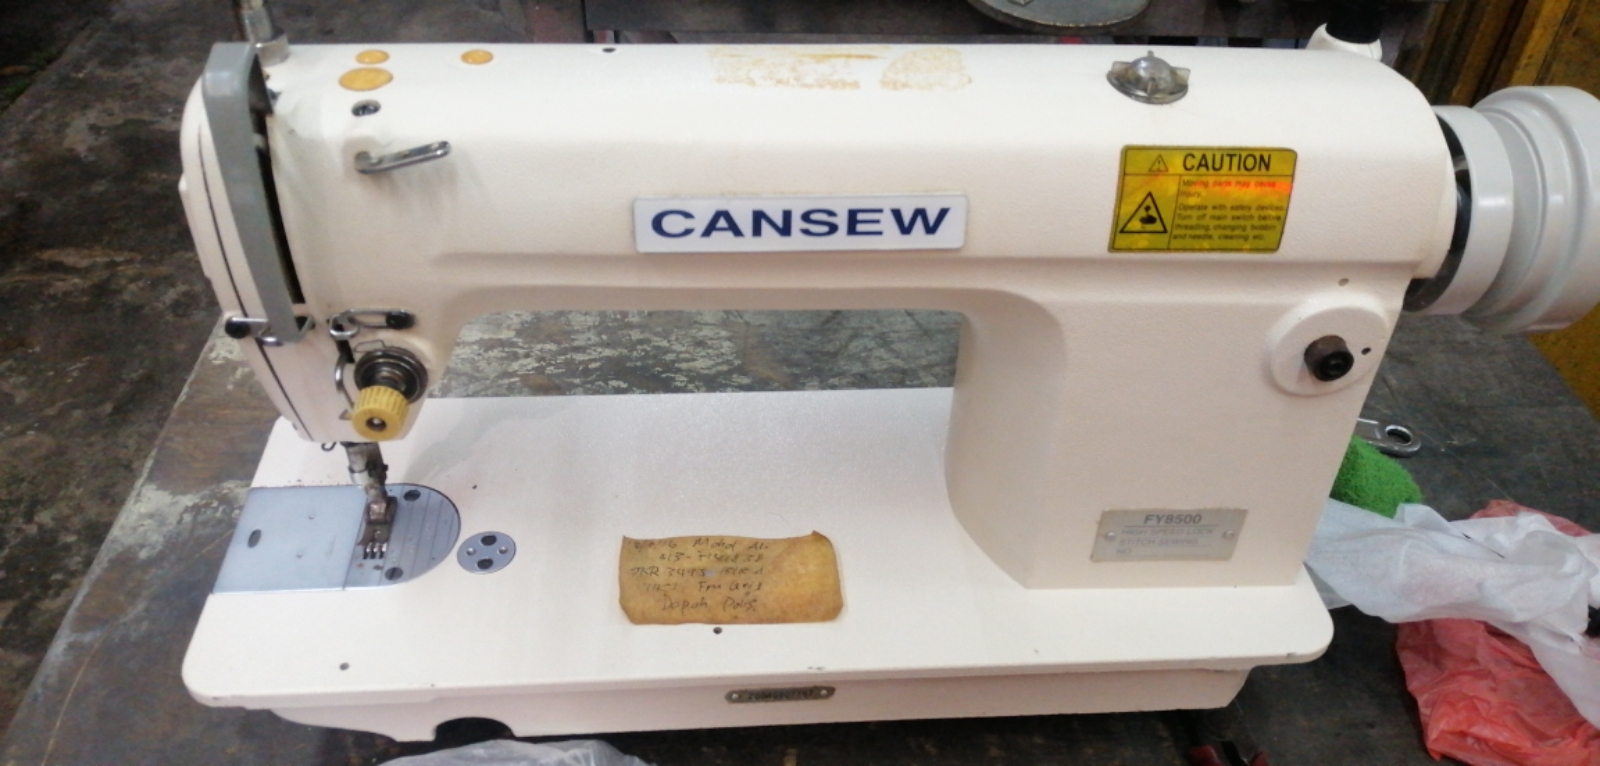 REPAIR SEVIS FOR CANSEW HI SPEED SEWING MACHINE 